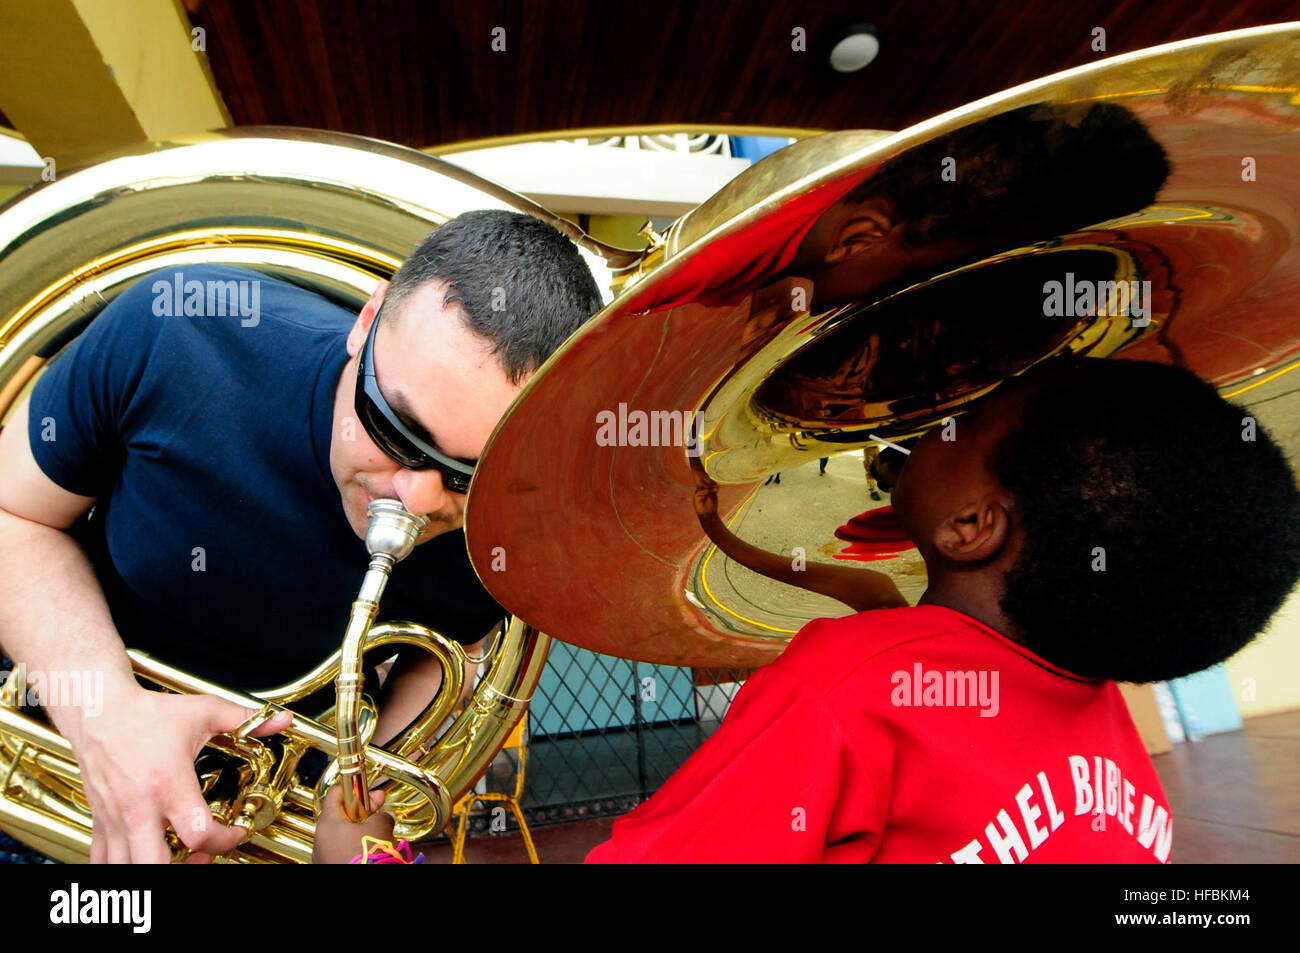 110414-N-EP471-311 KINGSTON, Jamaica (April 14, 2011) Musician 3rd Class Christopher Roland, from Oklahoma, plays his tuba for a Jamaican child during a Continuing Promise 2011 medical community service event at the National Sports Arena. Roland is embarked aboard the Military Sealift Command hospital ship USNS Comfort (T-AH 20) during the five-month humanitarian assistance mission to the Caribbean, Central and South American. (U.S. Navy photo by Mass Communication Specialist 1st Class Kim Williams/Released)  - Official U.S. Navy Imagery - Sailor-Oklahoma native plays his tuba for a Jamaican c Stock Photo